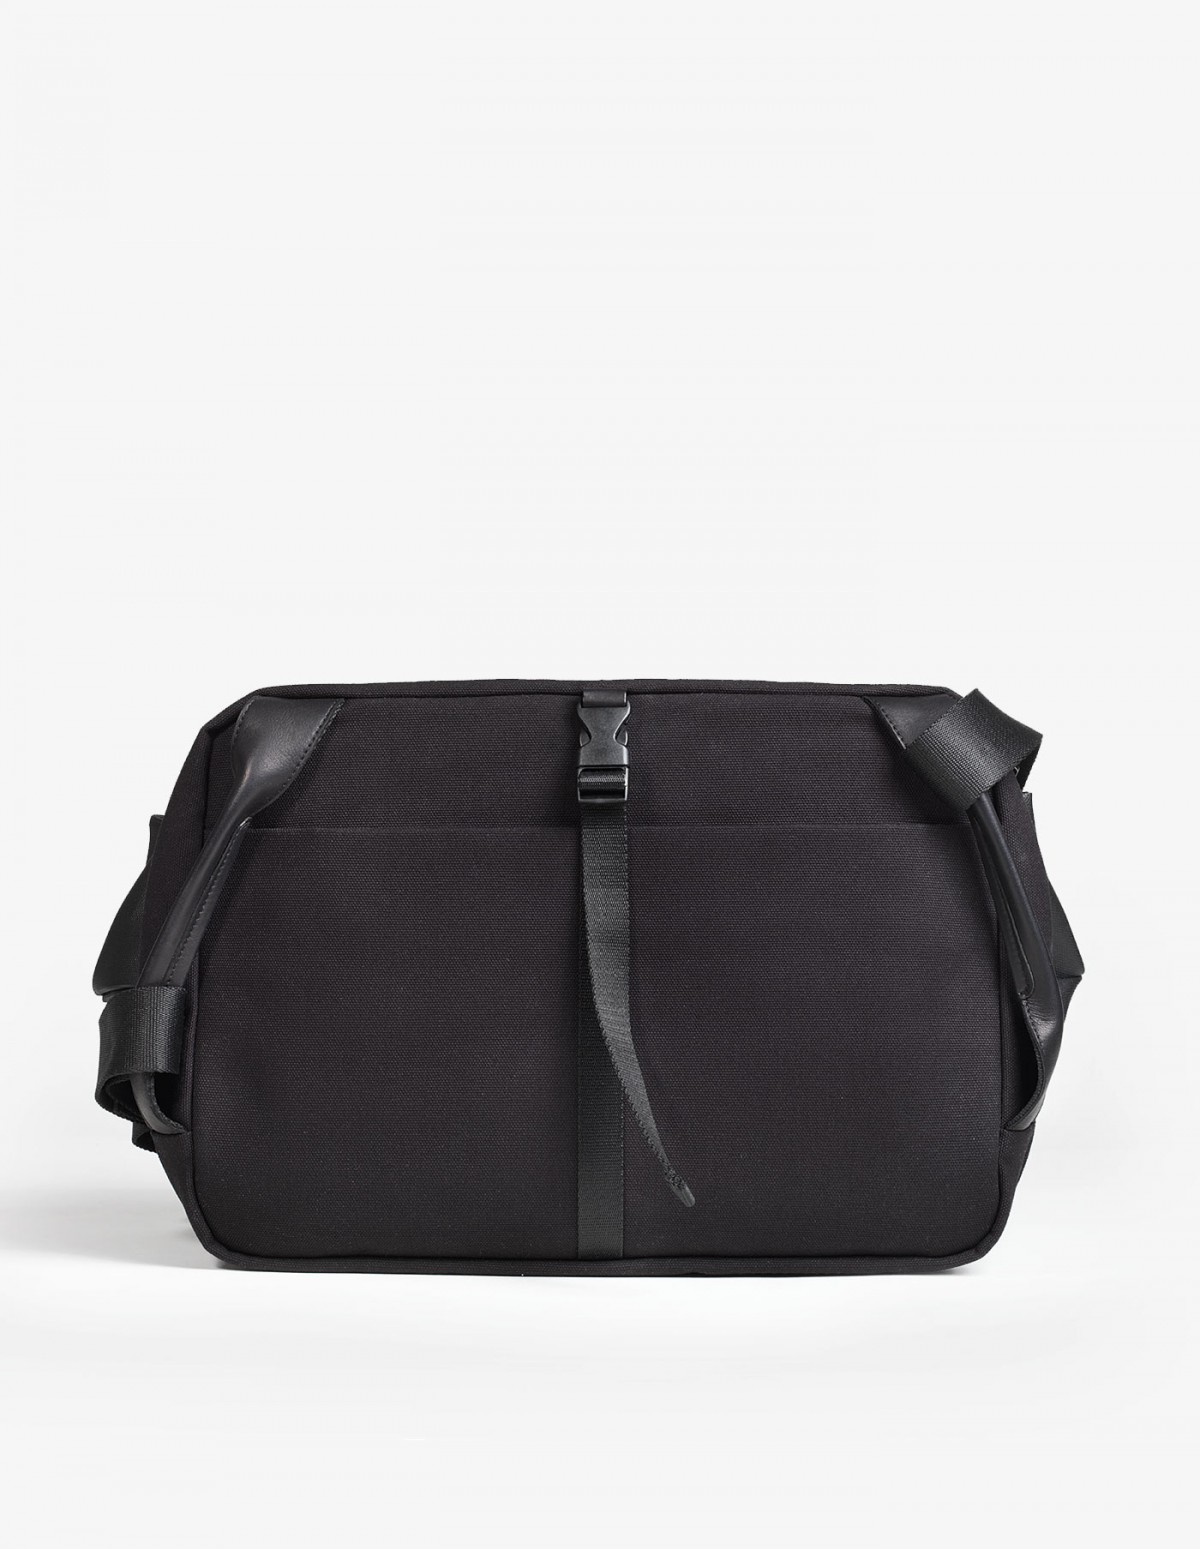 Riss in Black Coated Canvas - Côte & Ciel | Afura Store